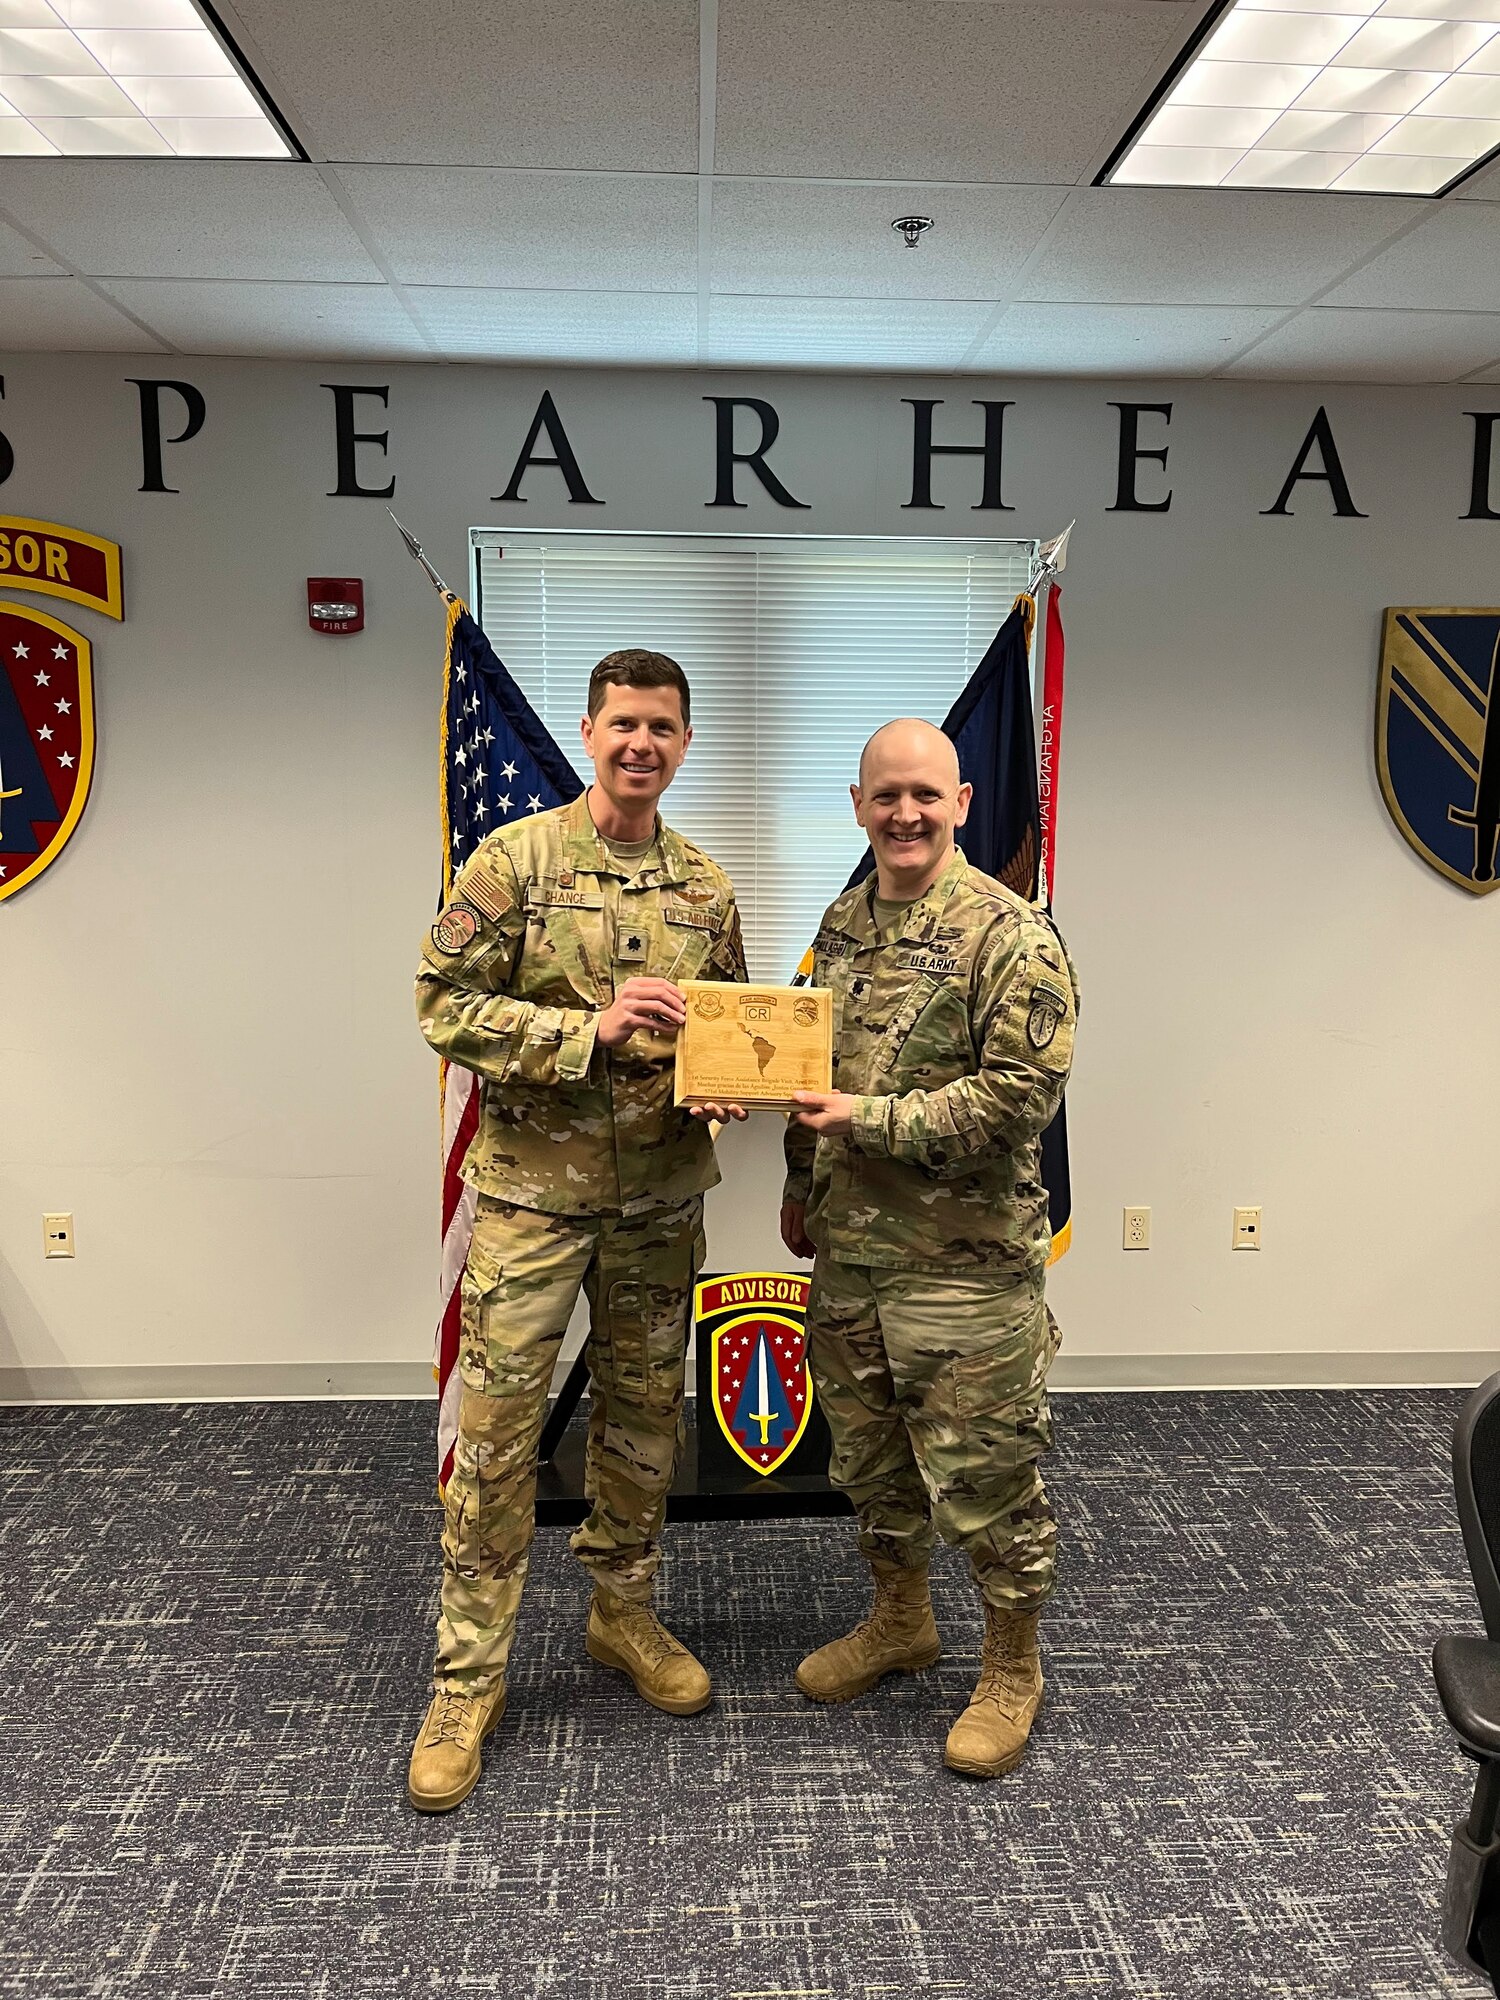 U.S. Air Force Lt. Col. Robert Chance, left, 571st Mobility Support Advisory Squadron commander, gives an appreciation gift to U.S. Army Lt. Col. James Gallagher, right, 1st Security Force Assistance Brigade executive officer, at Fort Benning, Georgia, April 20, 2023.